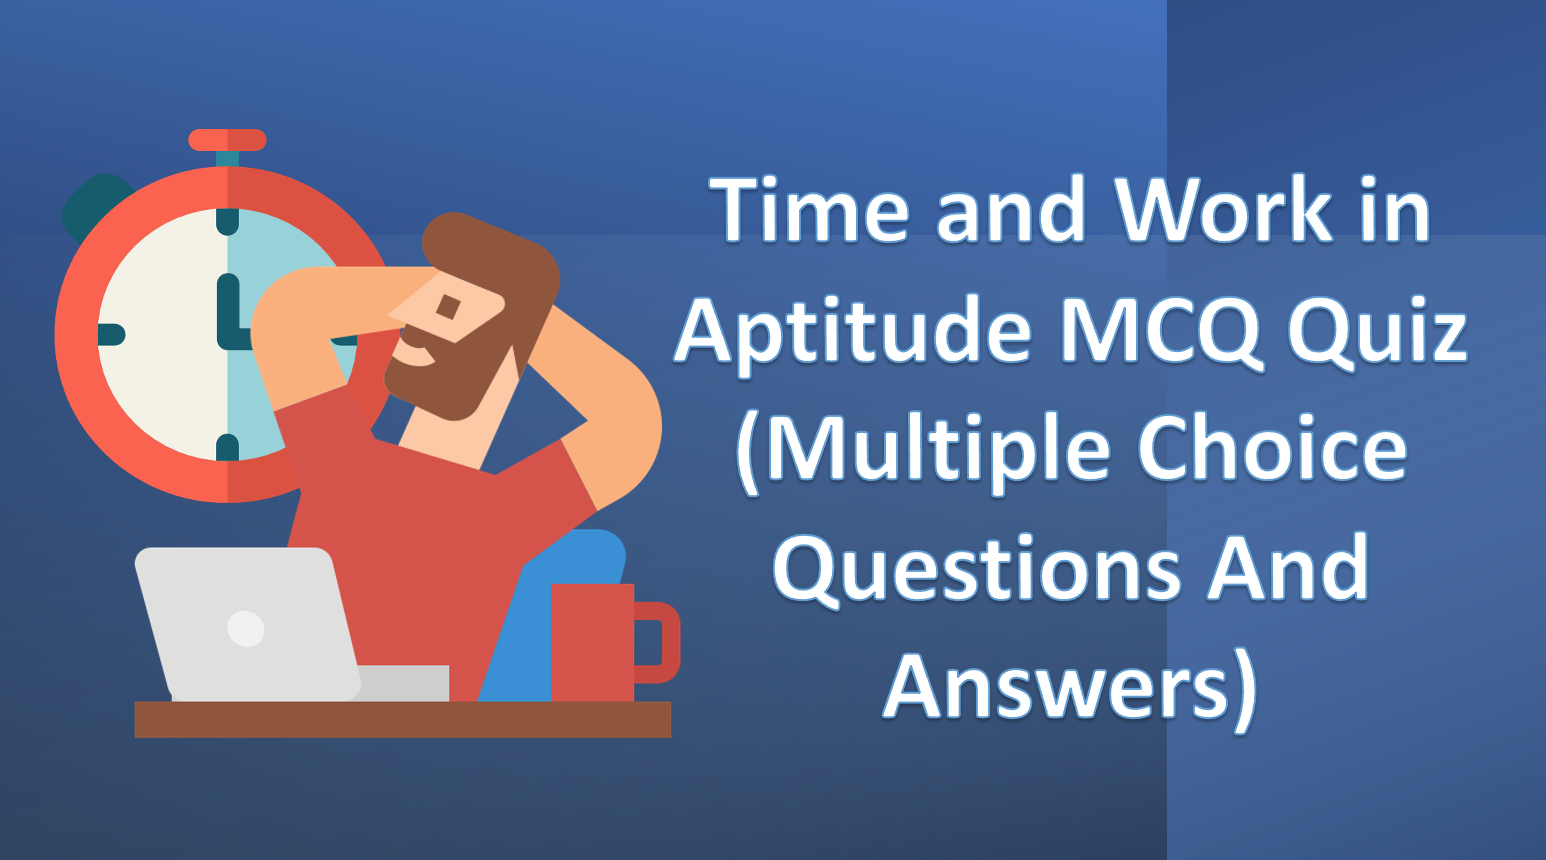 time-and-work-in-aptitude-mcq-quiz-multiple-choice-questions-and-answers-tutorials-link